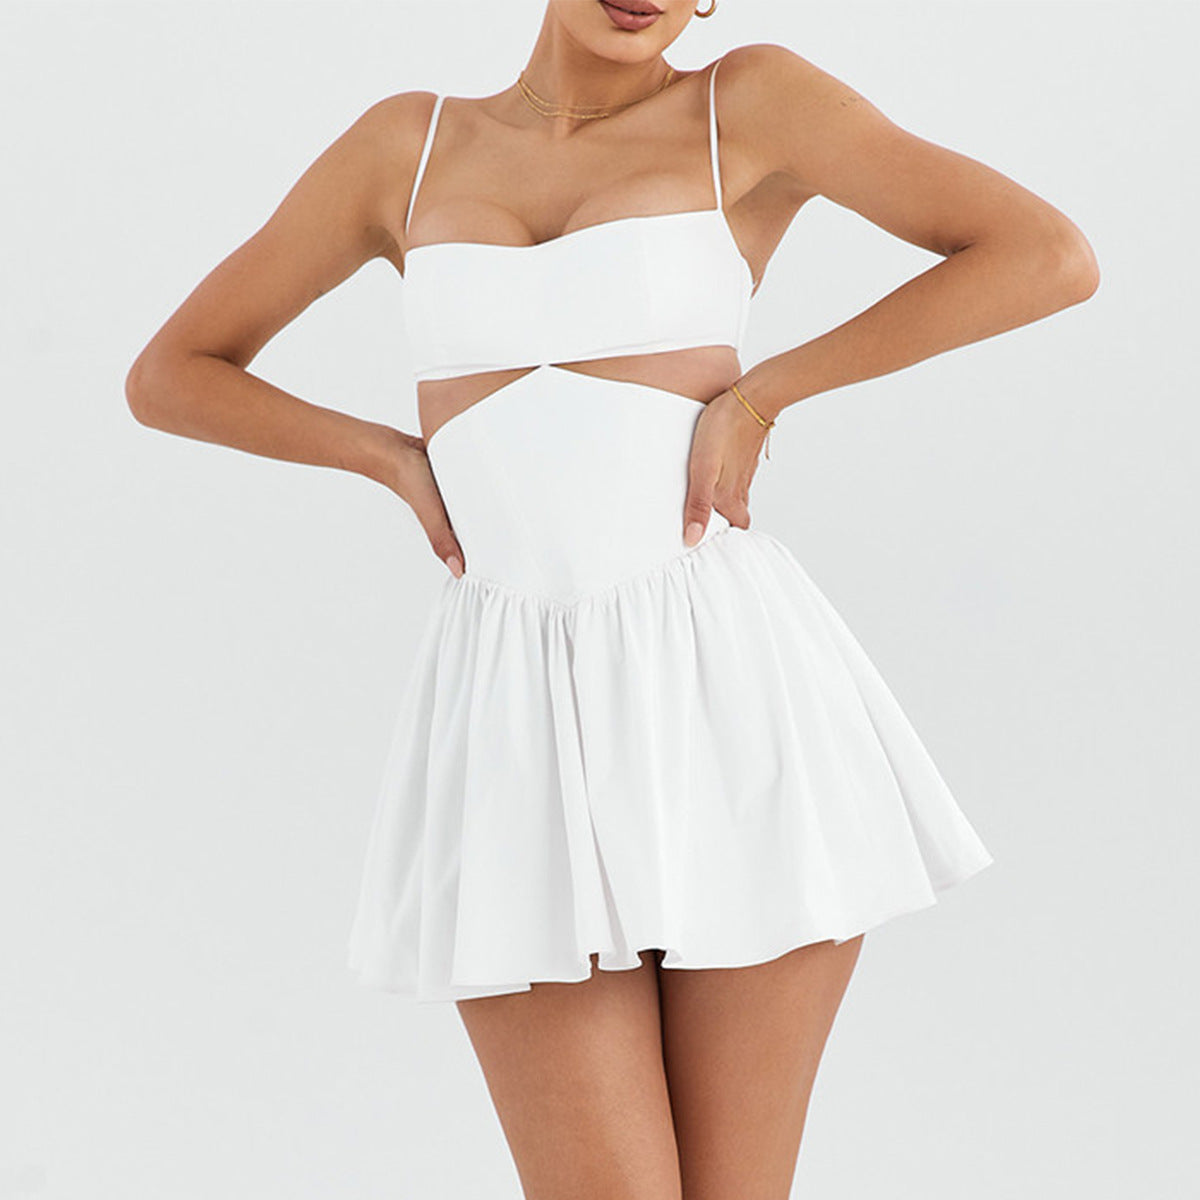 Women Clothing Sexy Cutout Cropped Outfit Suspender Solid Color Slim Fit Backless White Dress Short  Sexy - Ootddress